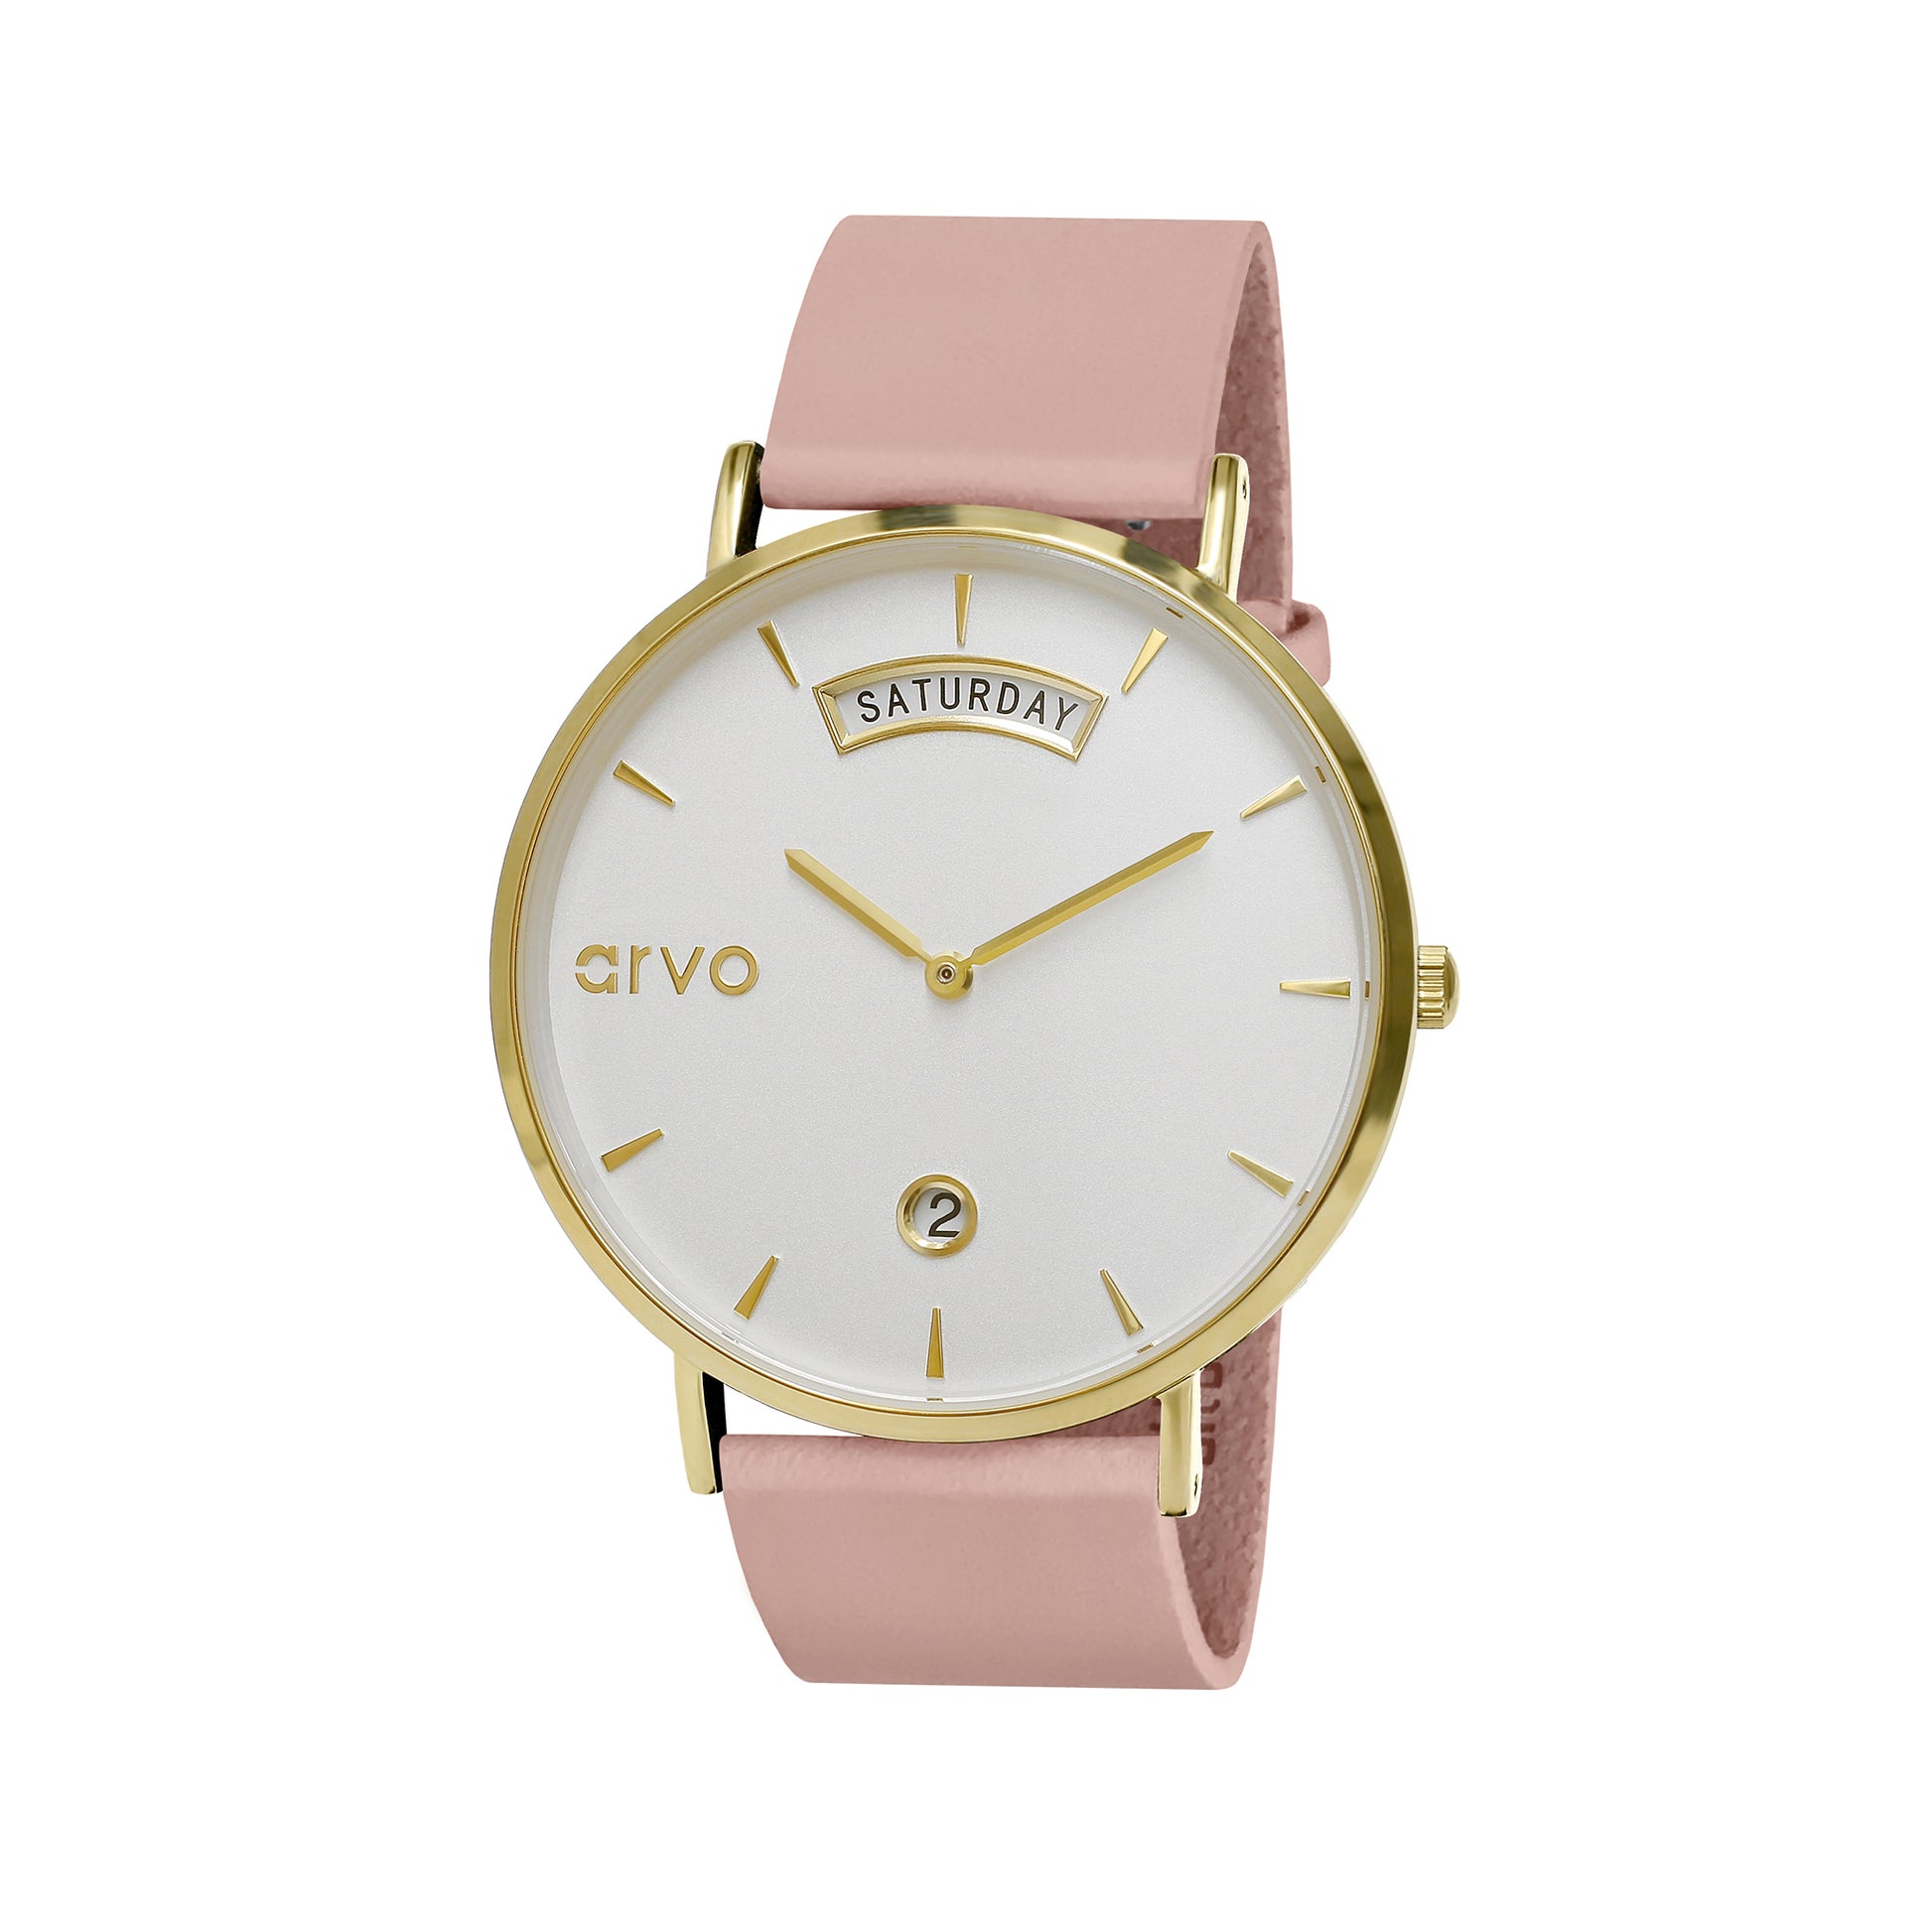 Arvo Awristacrat watches for women with blush pink band